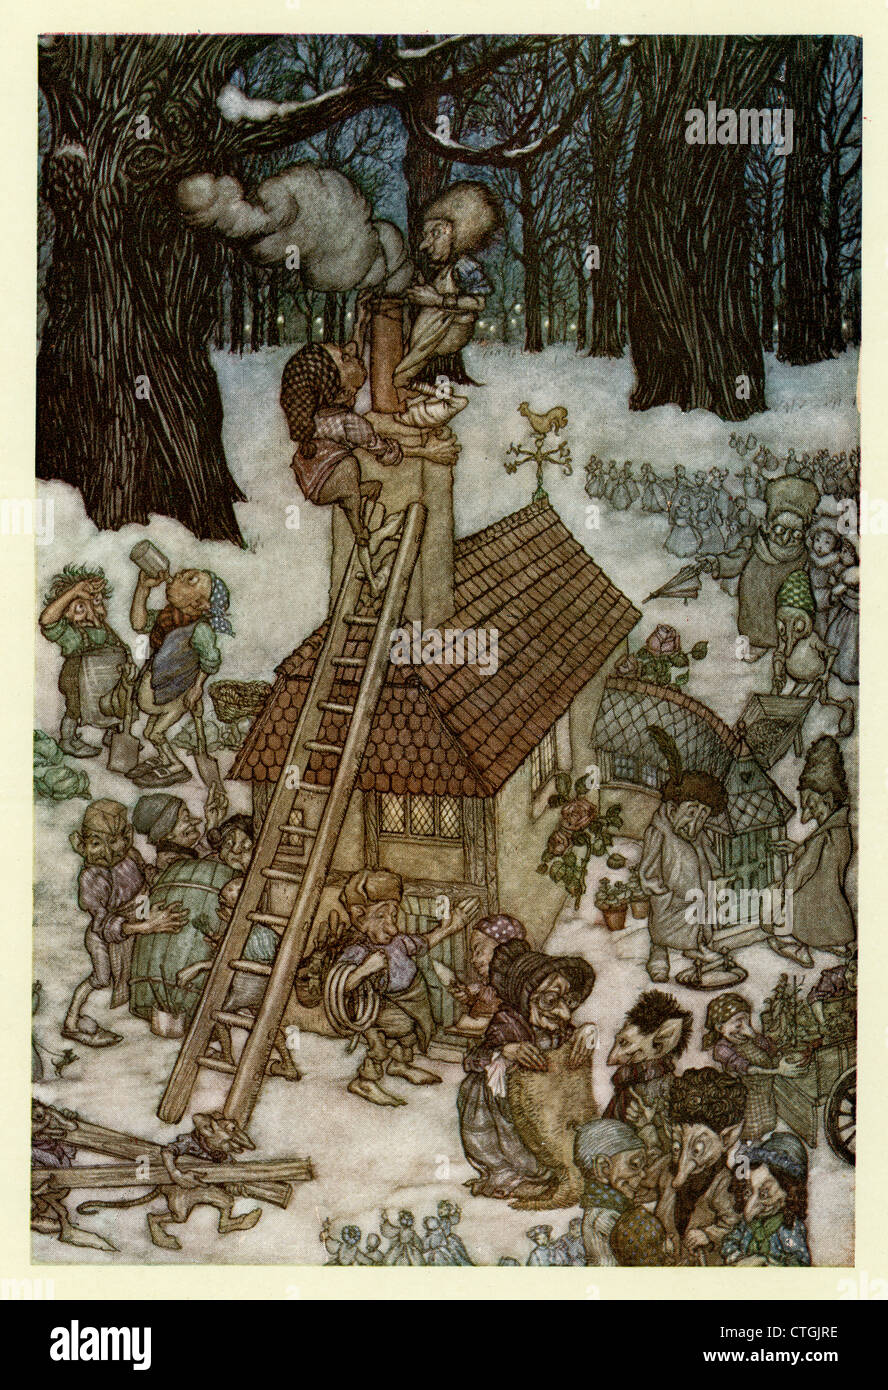 Illustration by Arthur Rackham from Peter Pan in Kensington Gardens. Building the house for Maimie. Stock Photo